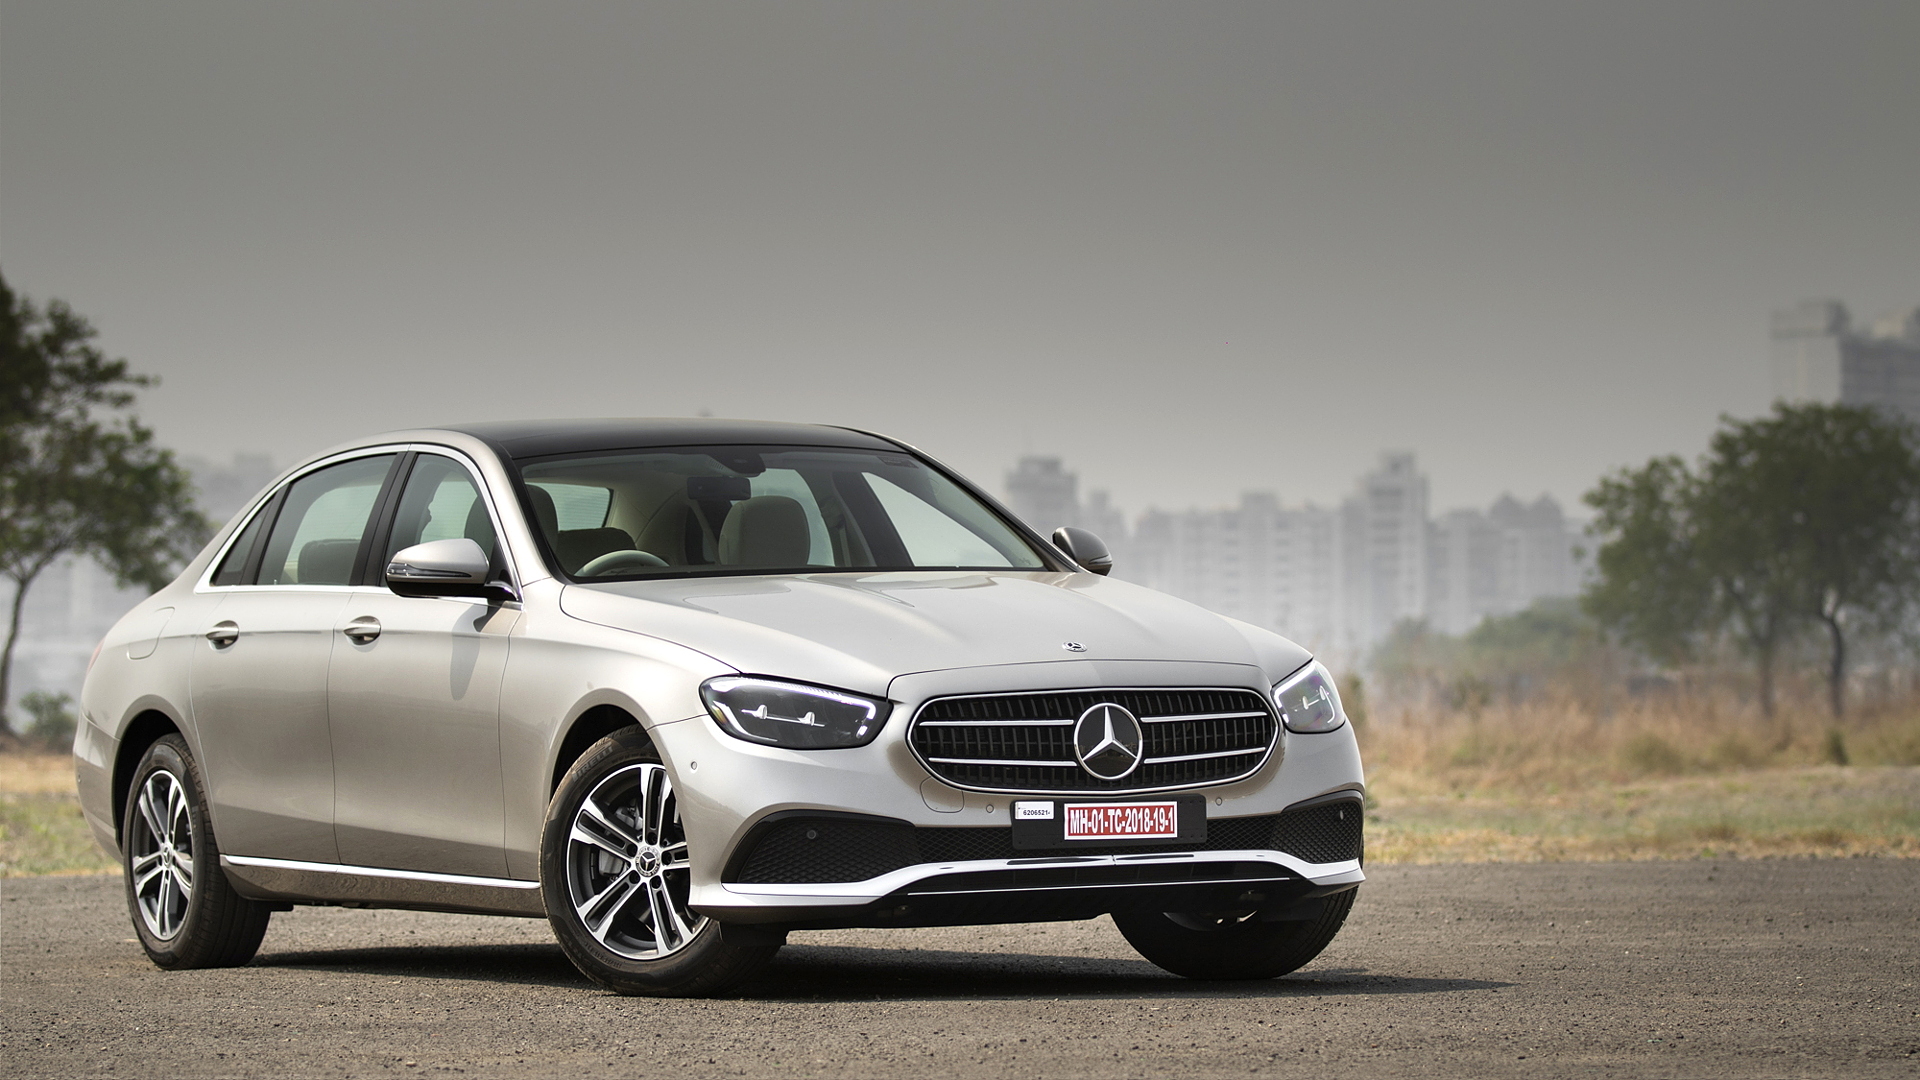 Mercedes Benz E Class E 350d Amg Line Top Model Price In India Features Specs And Reviews Carwale